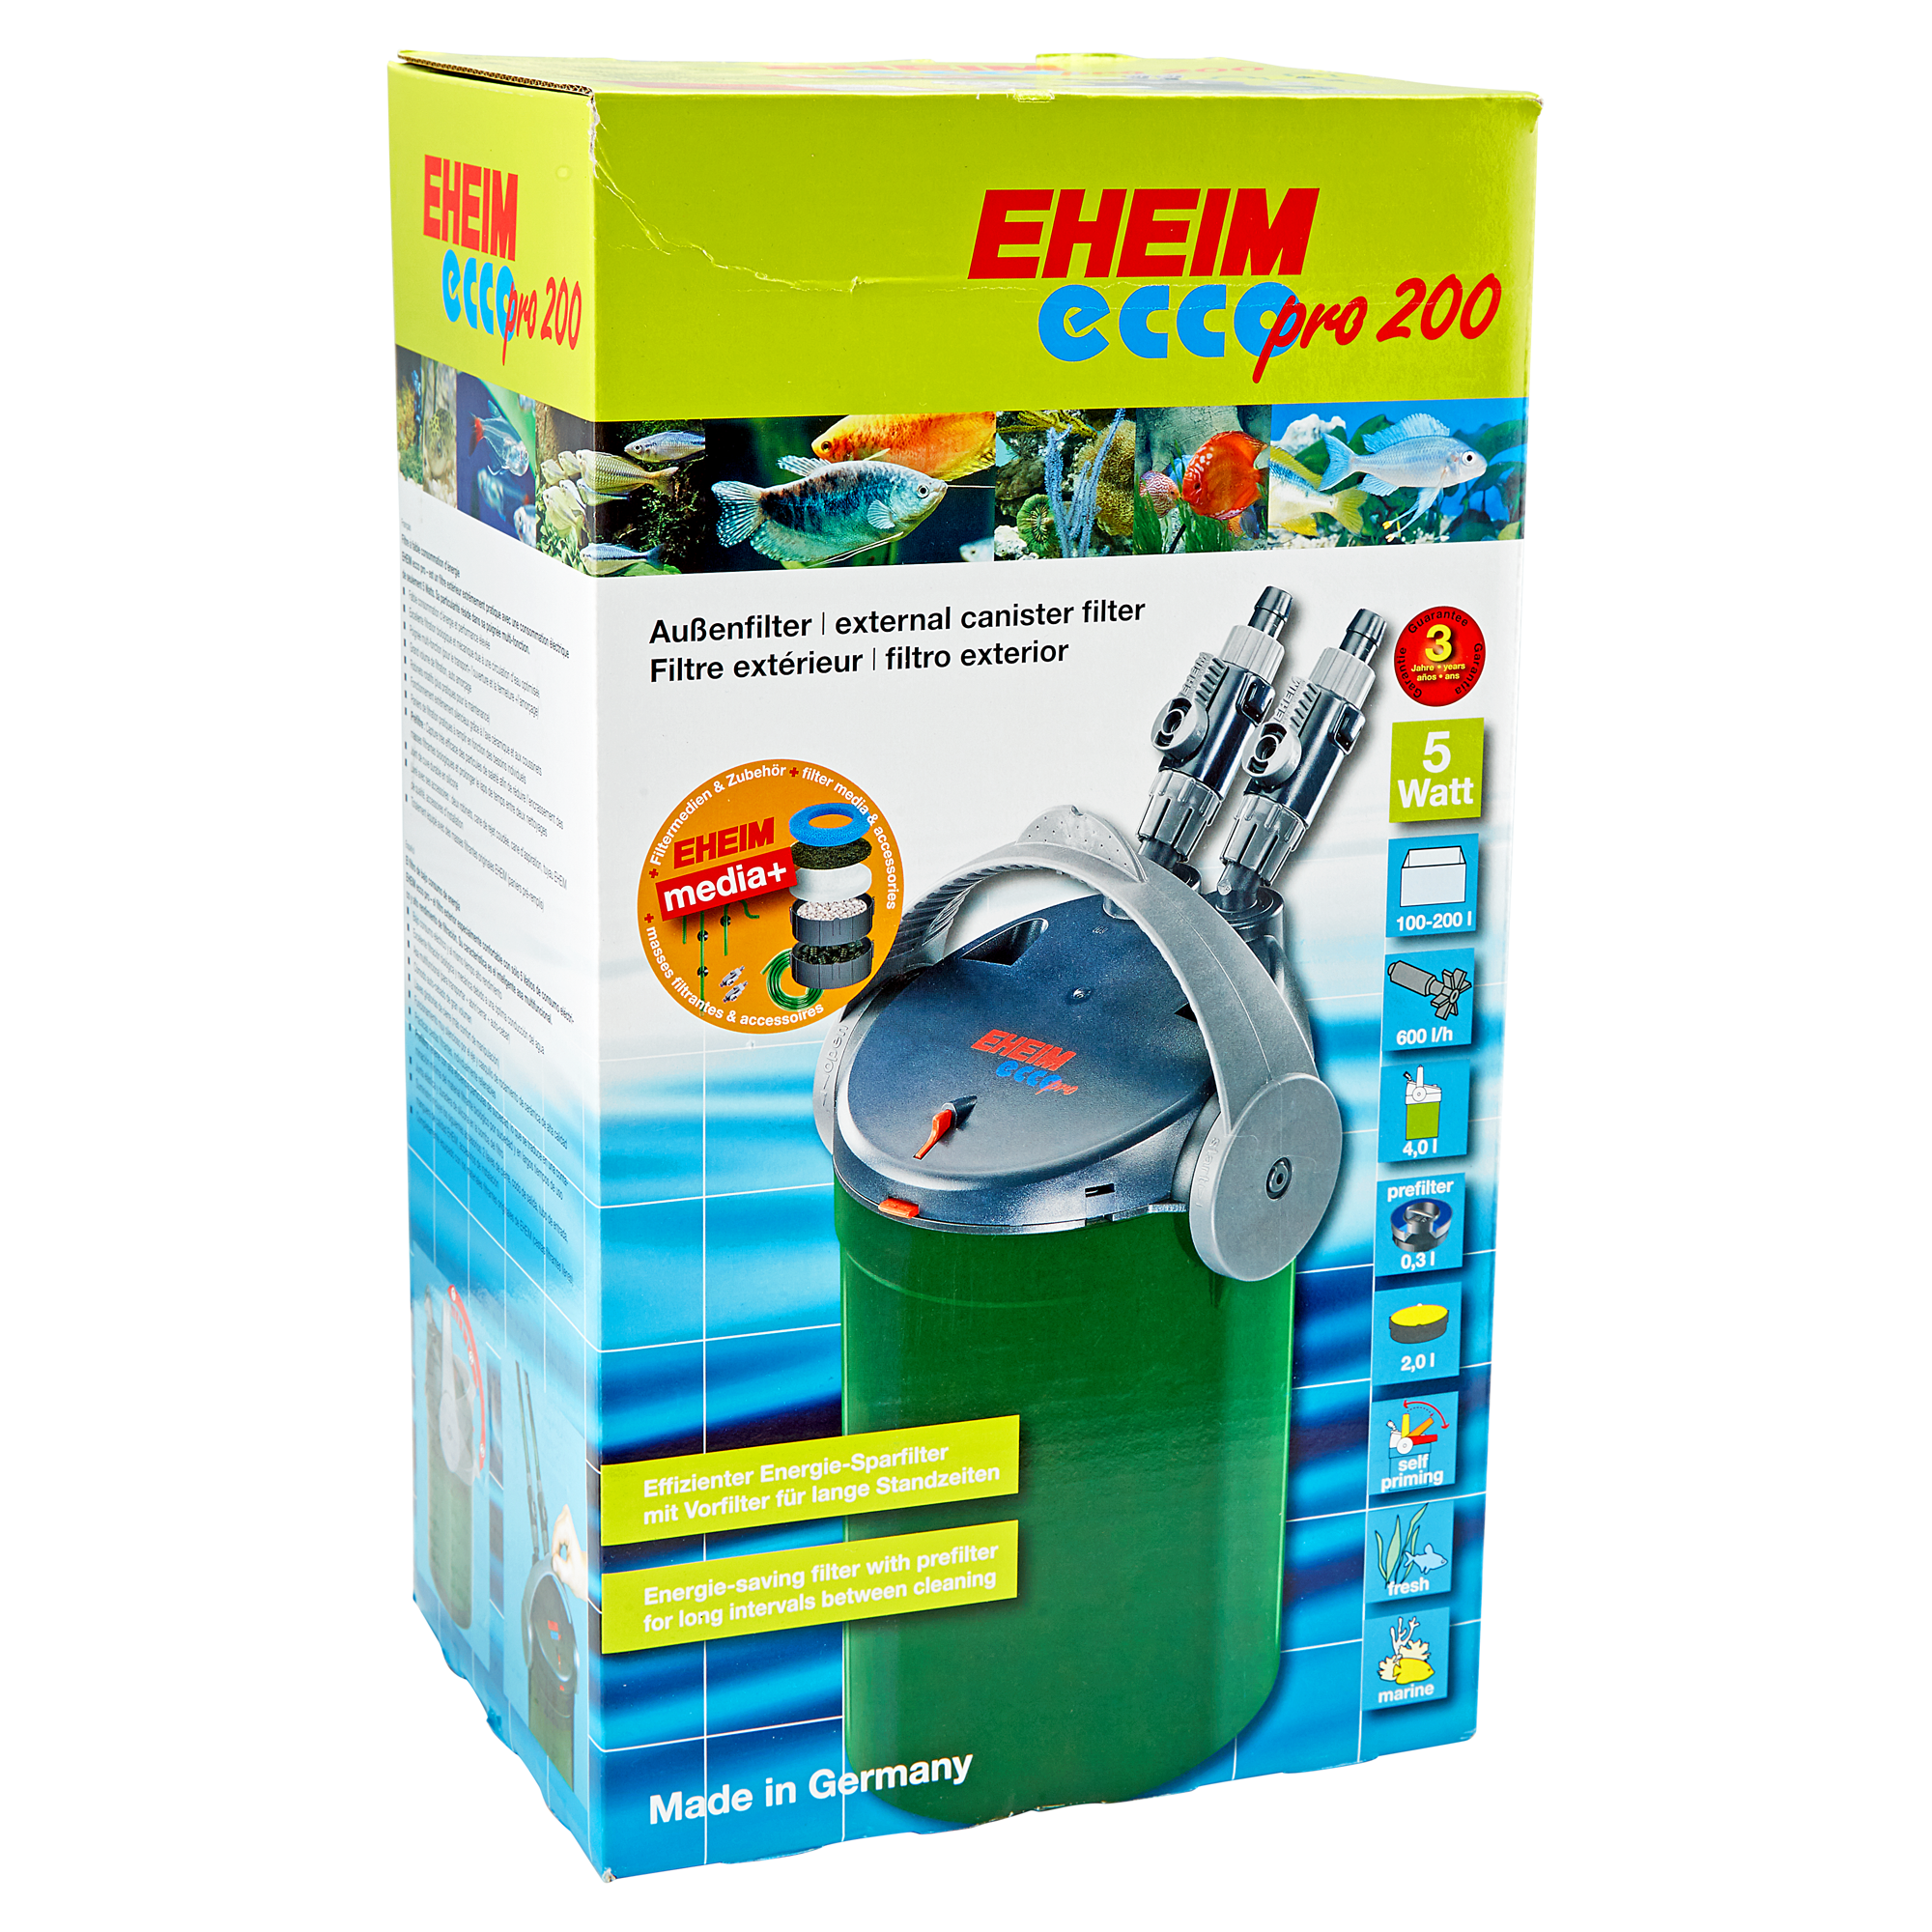 Aquarienfilter "Ecco" Pro 200 + product picture